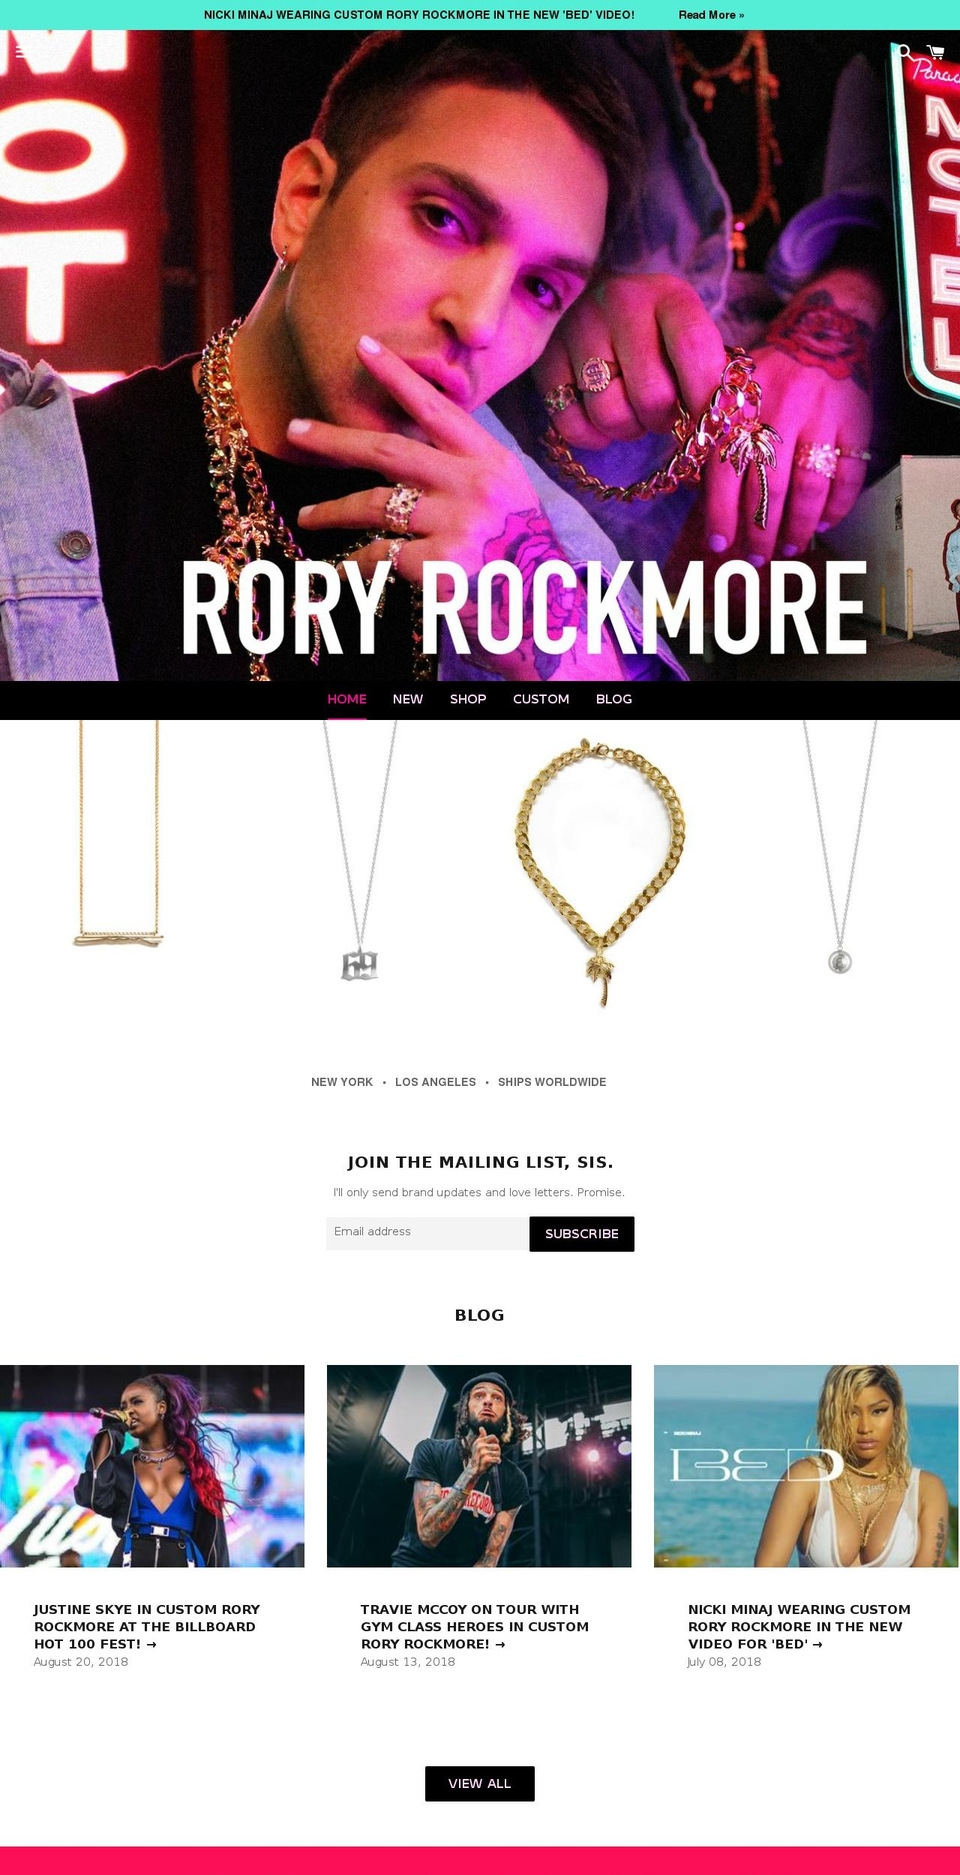 Publisher Shopify theme site example roryrockmore.com